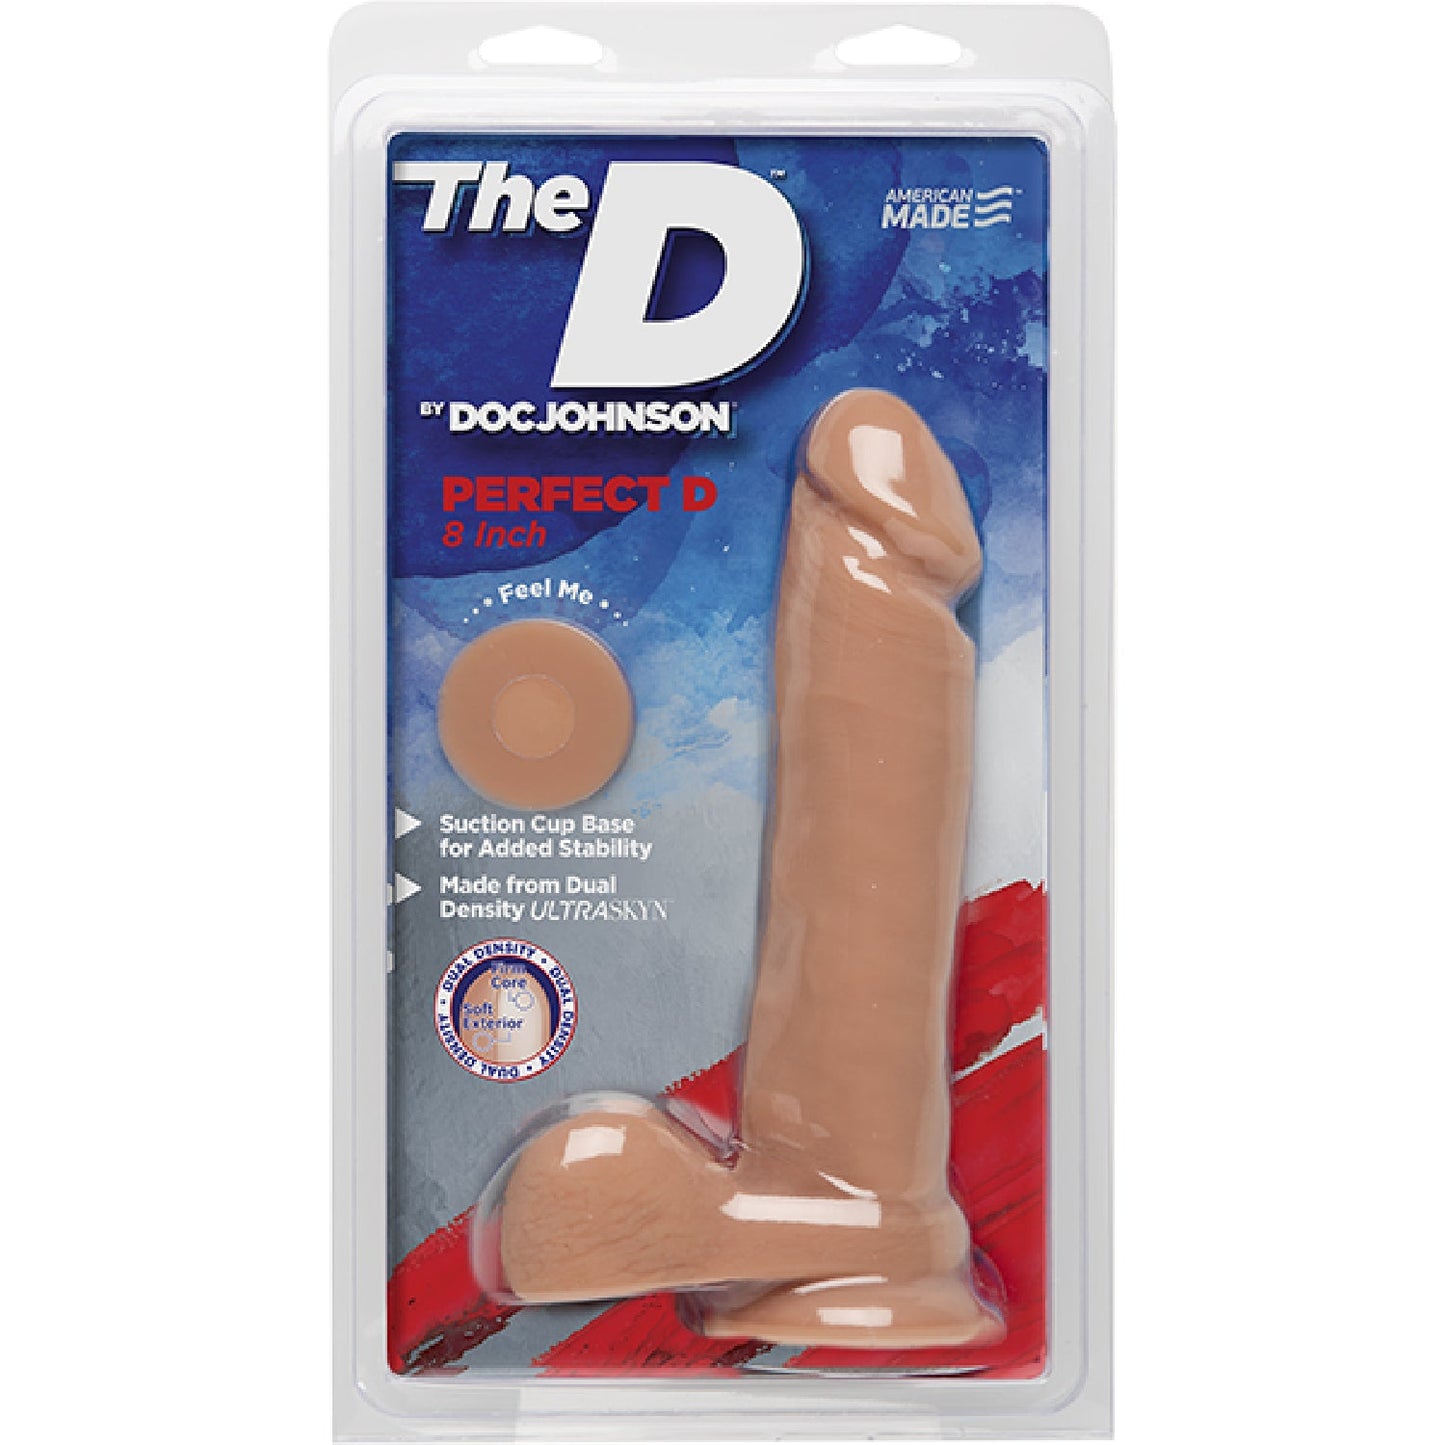 The D Ultraskyn Perfect D 8" Dong with Suction Cup(Vanilla)